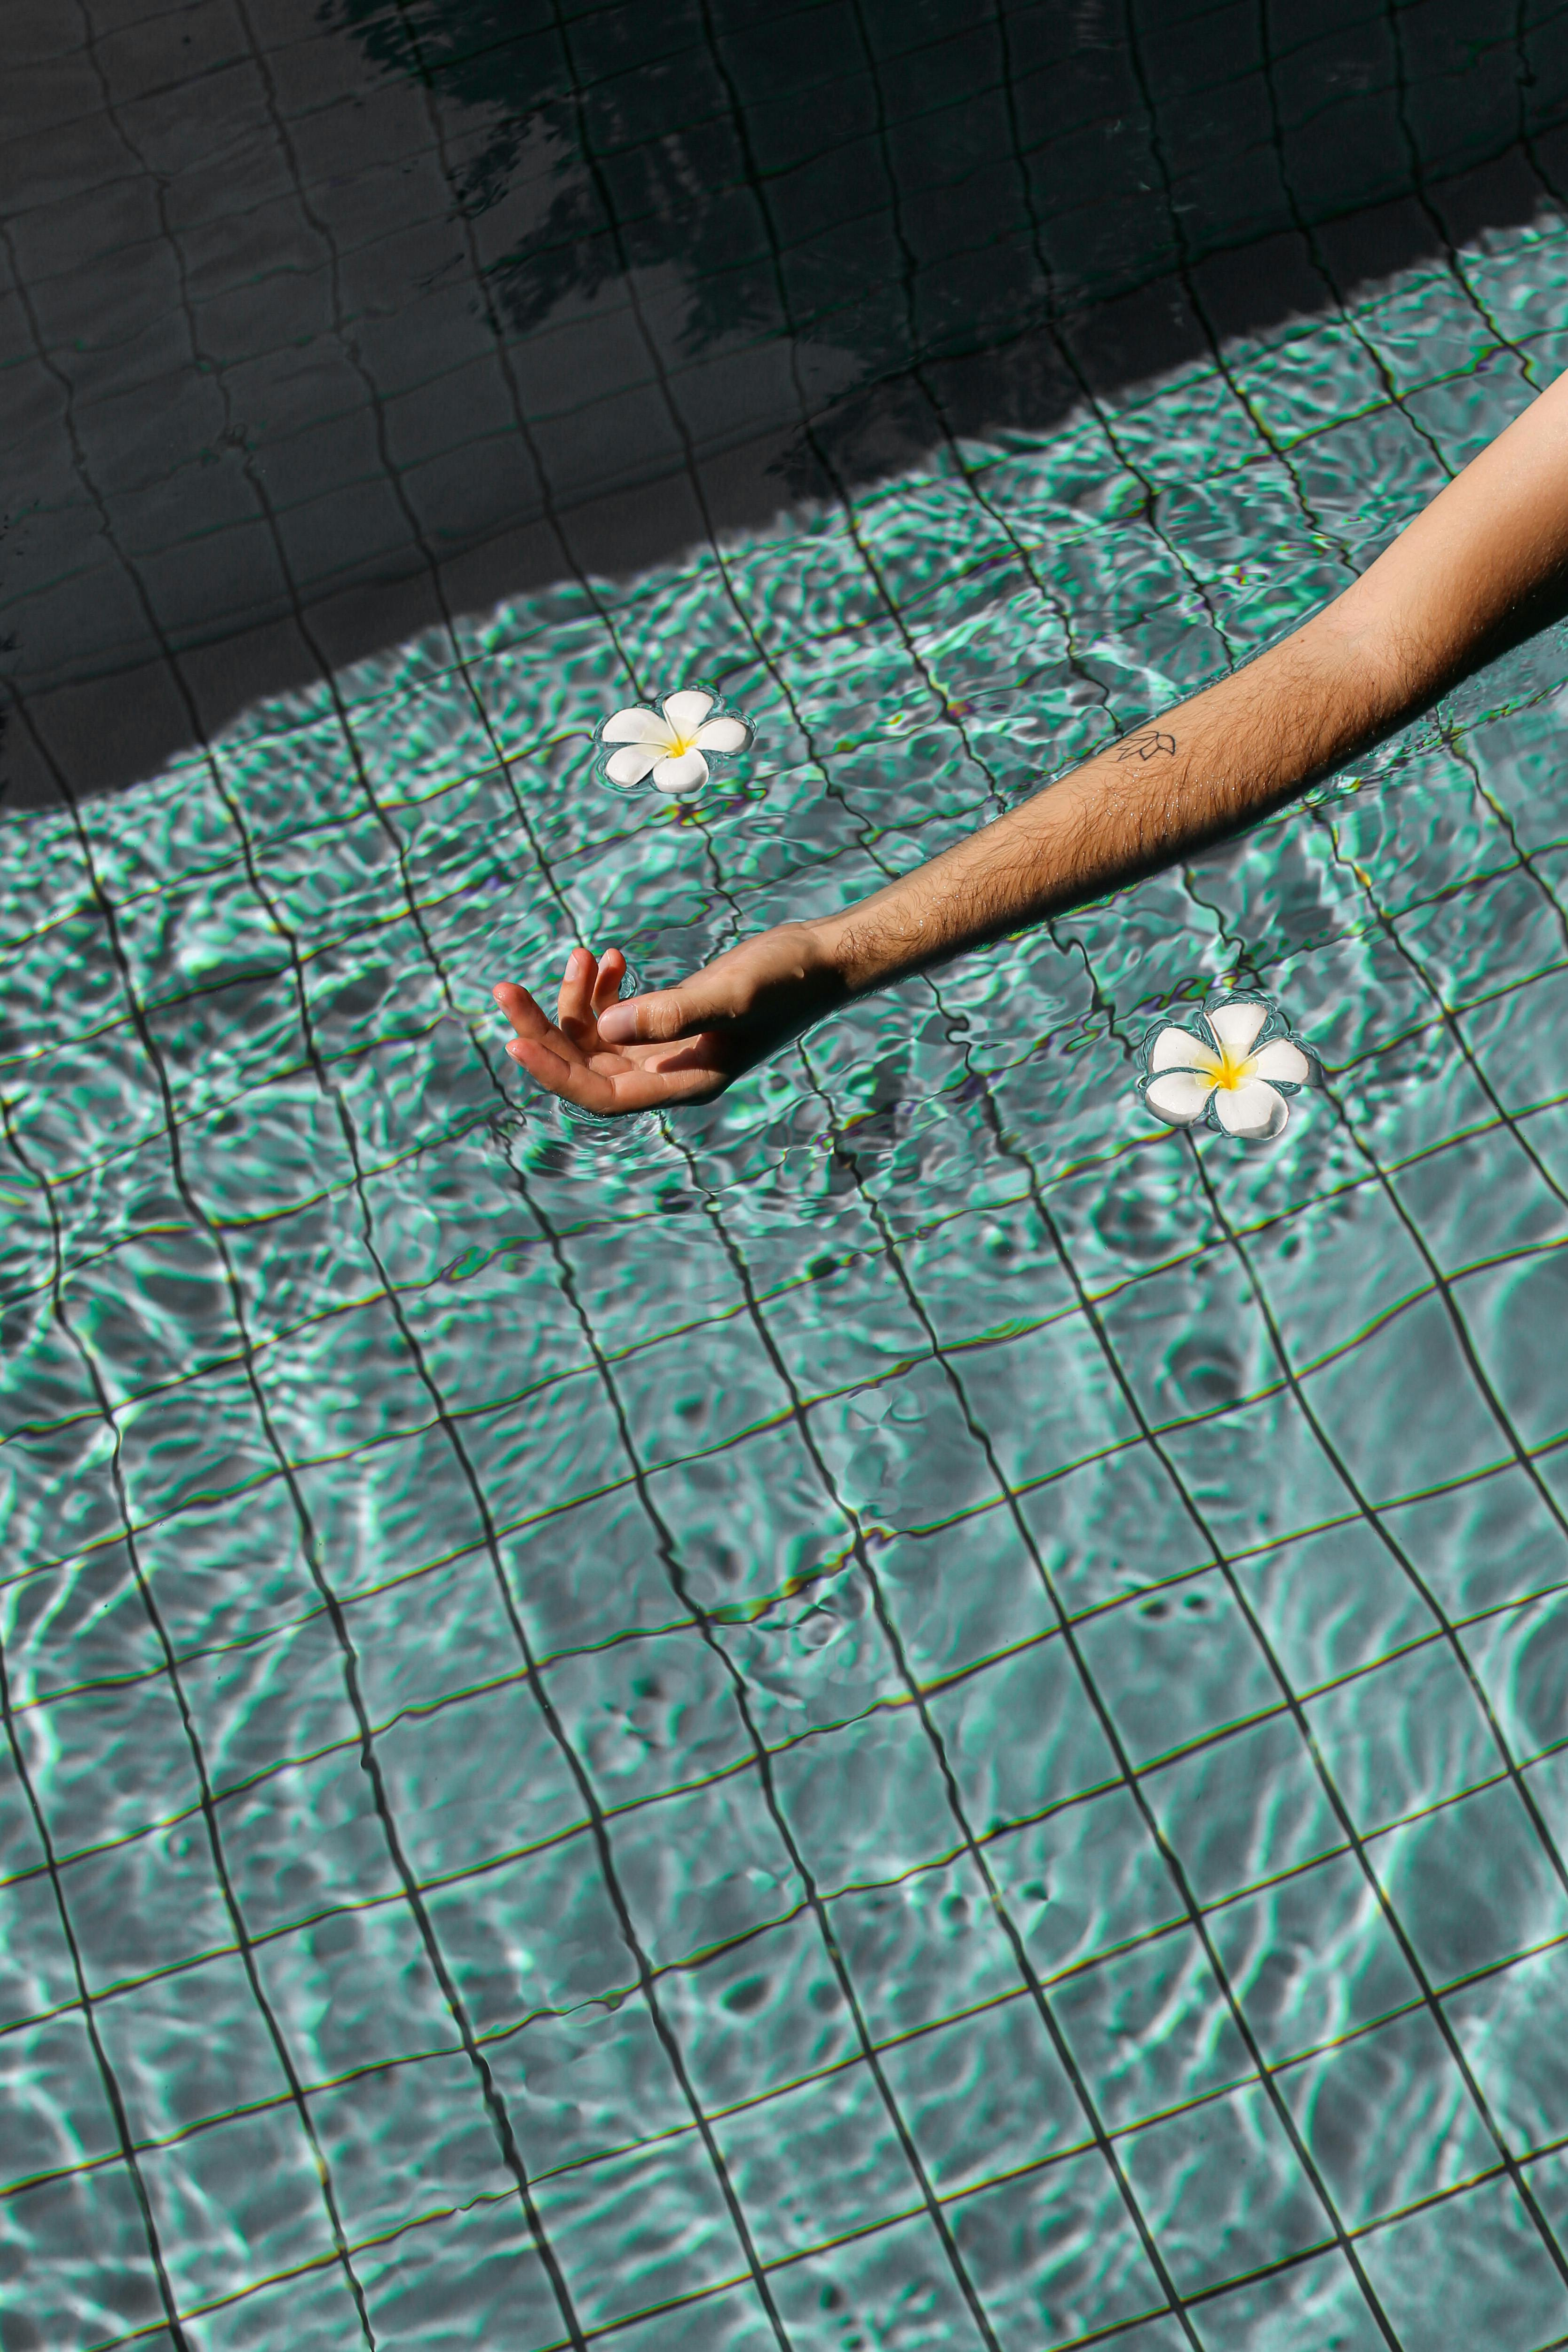 clear water in a pool flower heads and an arm of a man